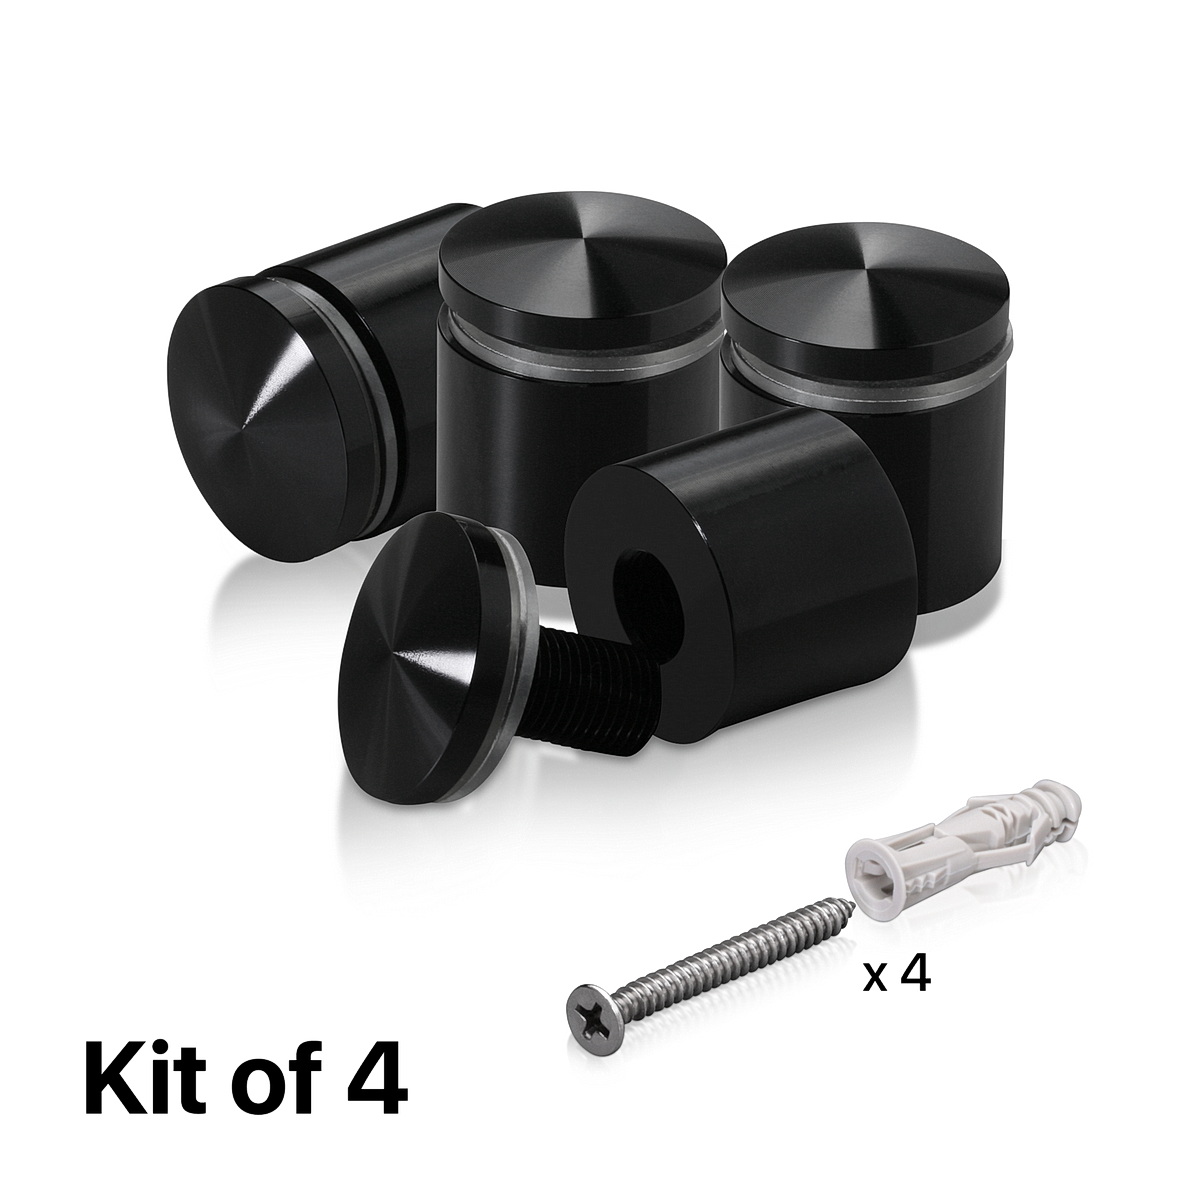 (Set of 4) 1'' Diameter X 3/4'' Barrel Length, Aluminum Rounded Head Standoffs, Black Anodized Finish Standoff with (4) 2216Z Screws and (4) LANC1 Anchors for concrete or drywall (For Inside / Outside use) [Required Material Hole Size: 7/16'']